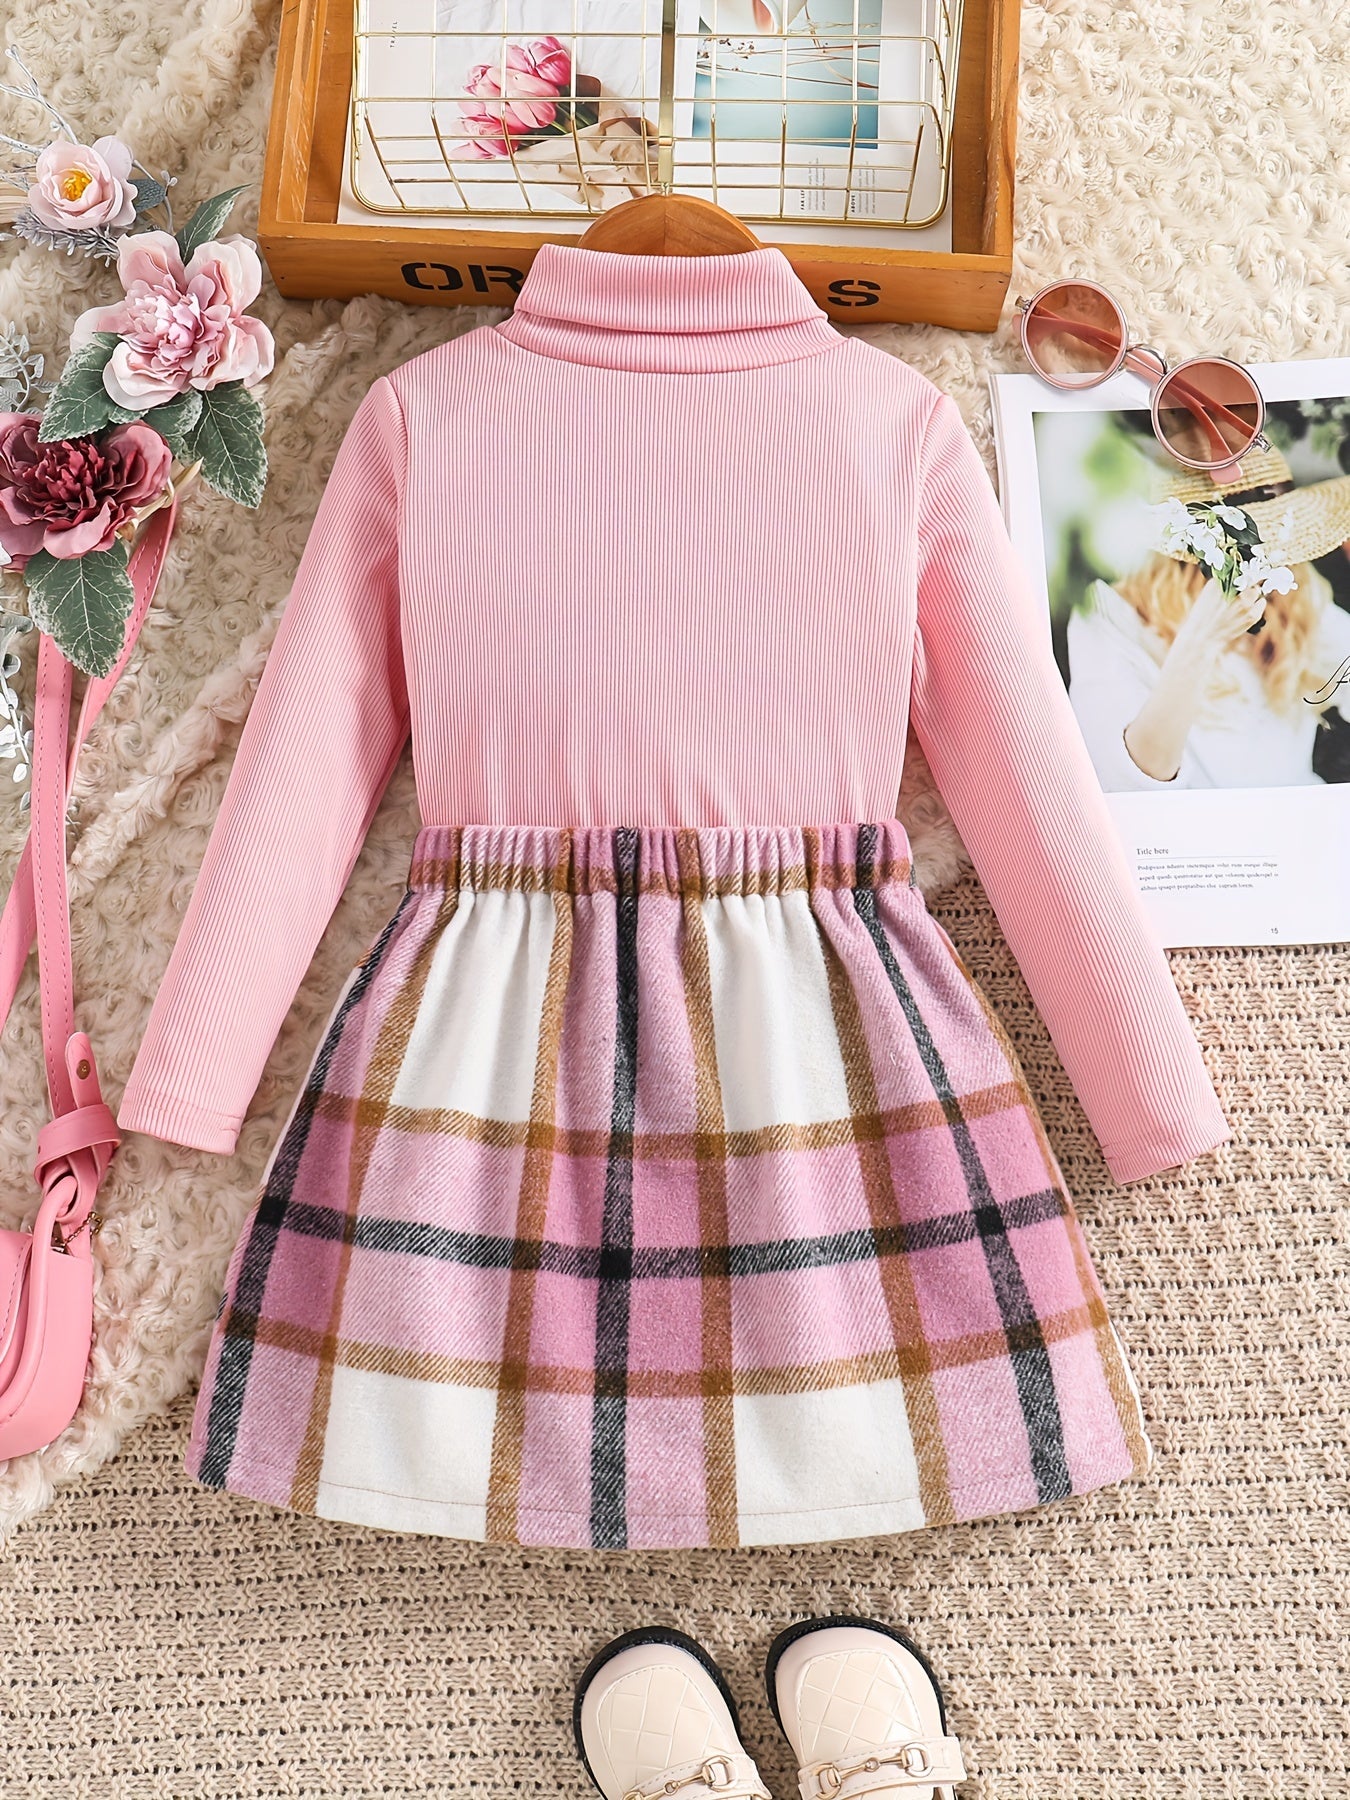 2pcs Girl's Casual Outfit, Turtleneck Top & Plaid Pattern Skirt Set, Toddler Kid's Clothes For Spring Autumn